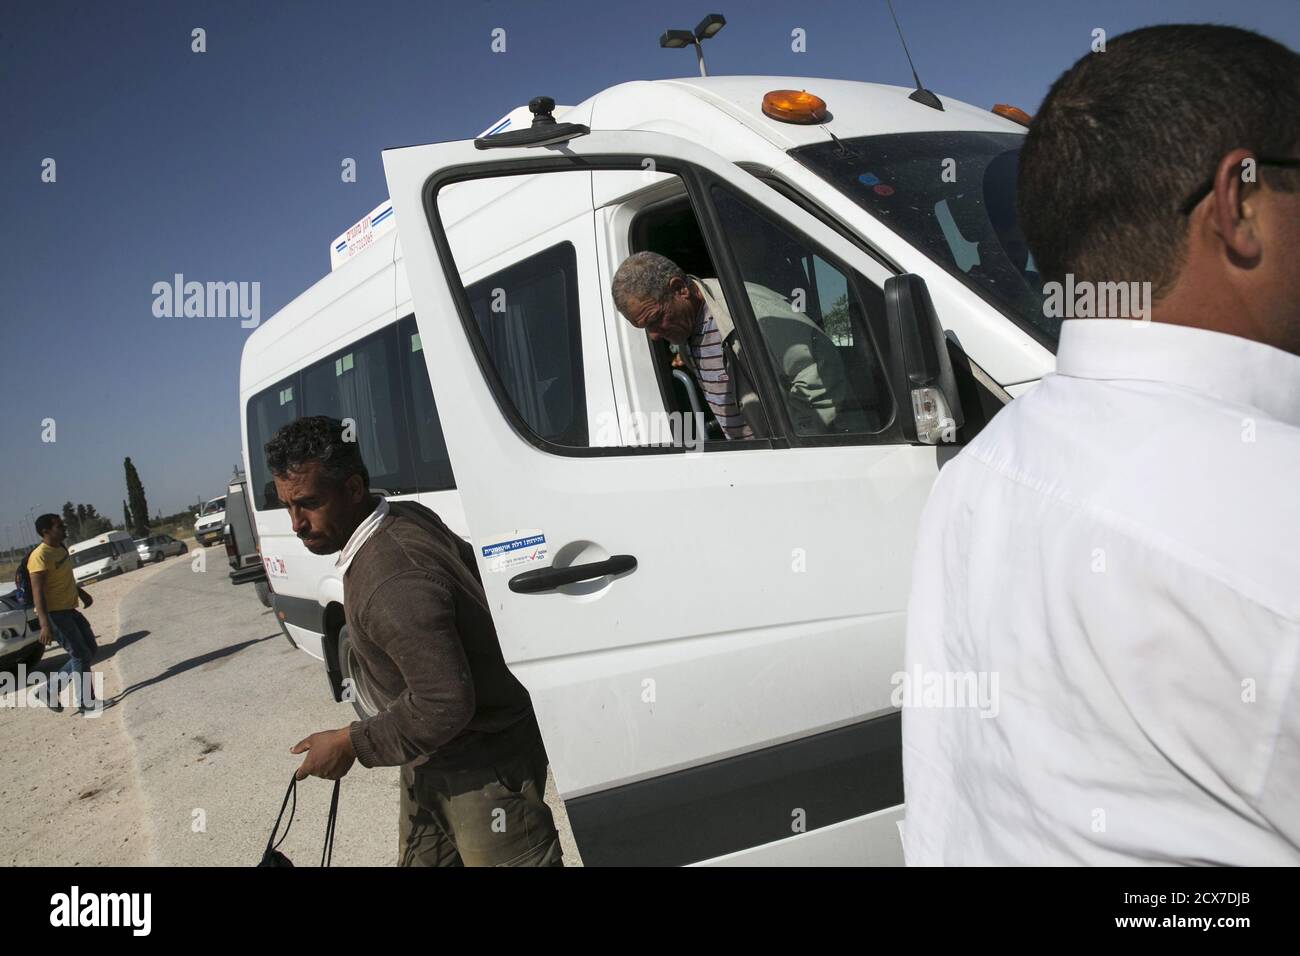 Palestinian labourers with permits to work in Israel step off a minibus as they return to the West Bank at Israel's Eyal checkpoint near the West Bank town of Qalqilya May 20, 2015. Prime Minister Benjamin Netanyahu suspended on Wednesday new bus travel and checkpoint regulations for Palestinian labourers only hours after they were imposed to an outcry by critics accusing Israel of racial segregation. REUTERS/Baz Ratner Stock Photo